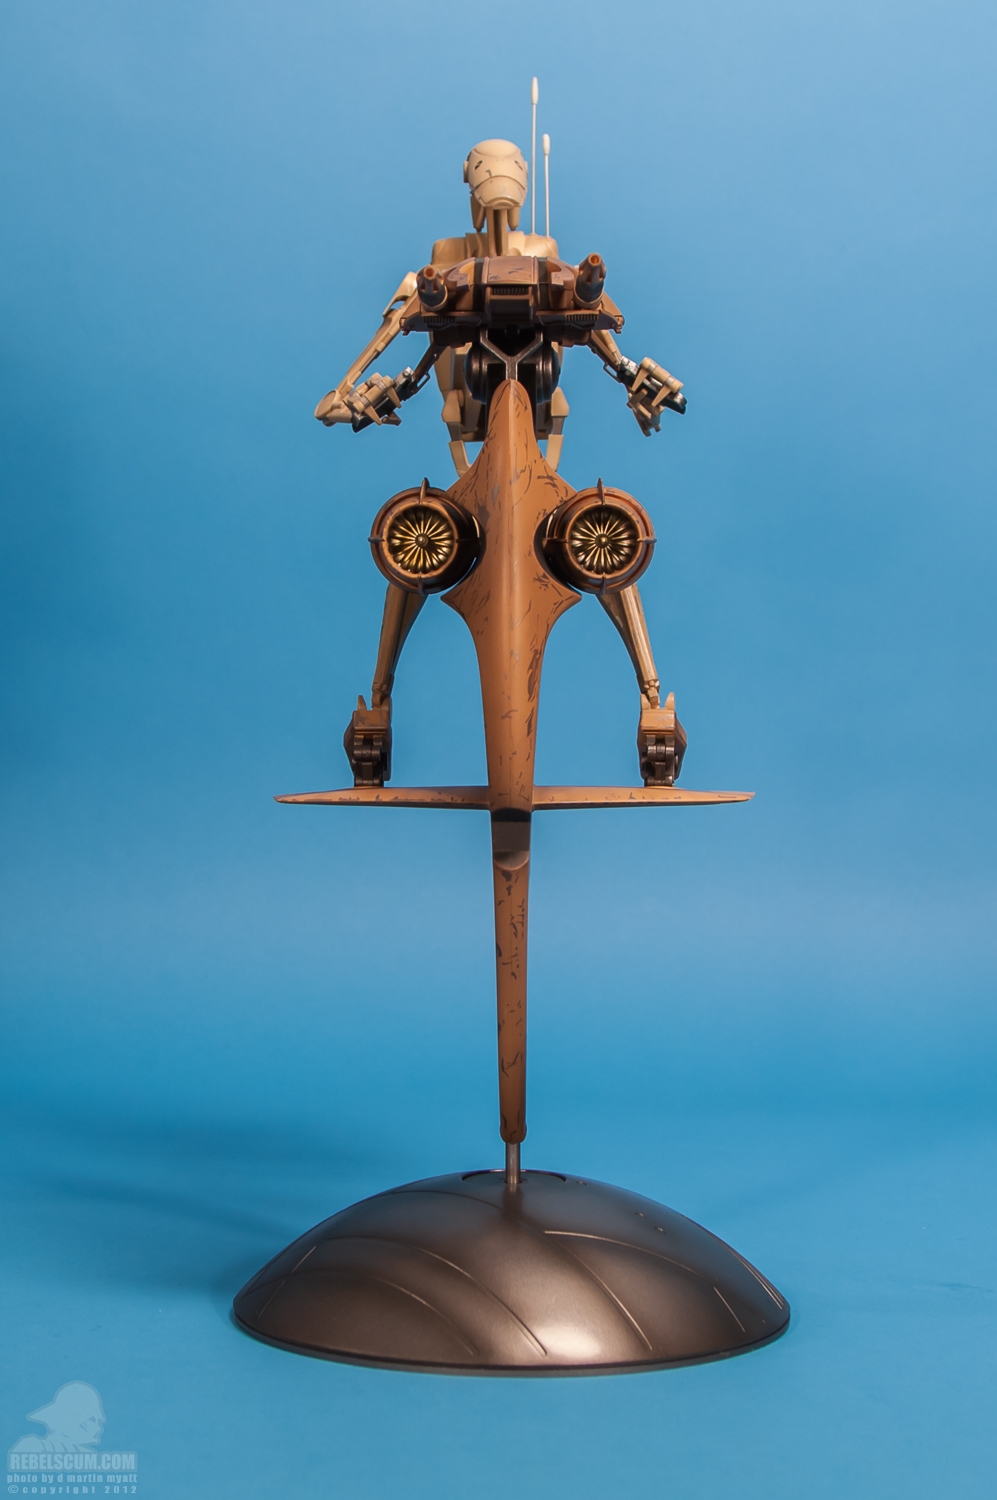 STAP_Battle_Droid_Star_Wars_Sideshow_Collectibles-35.jpg